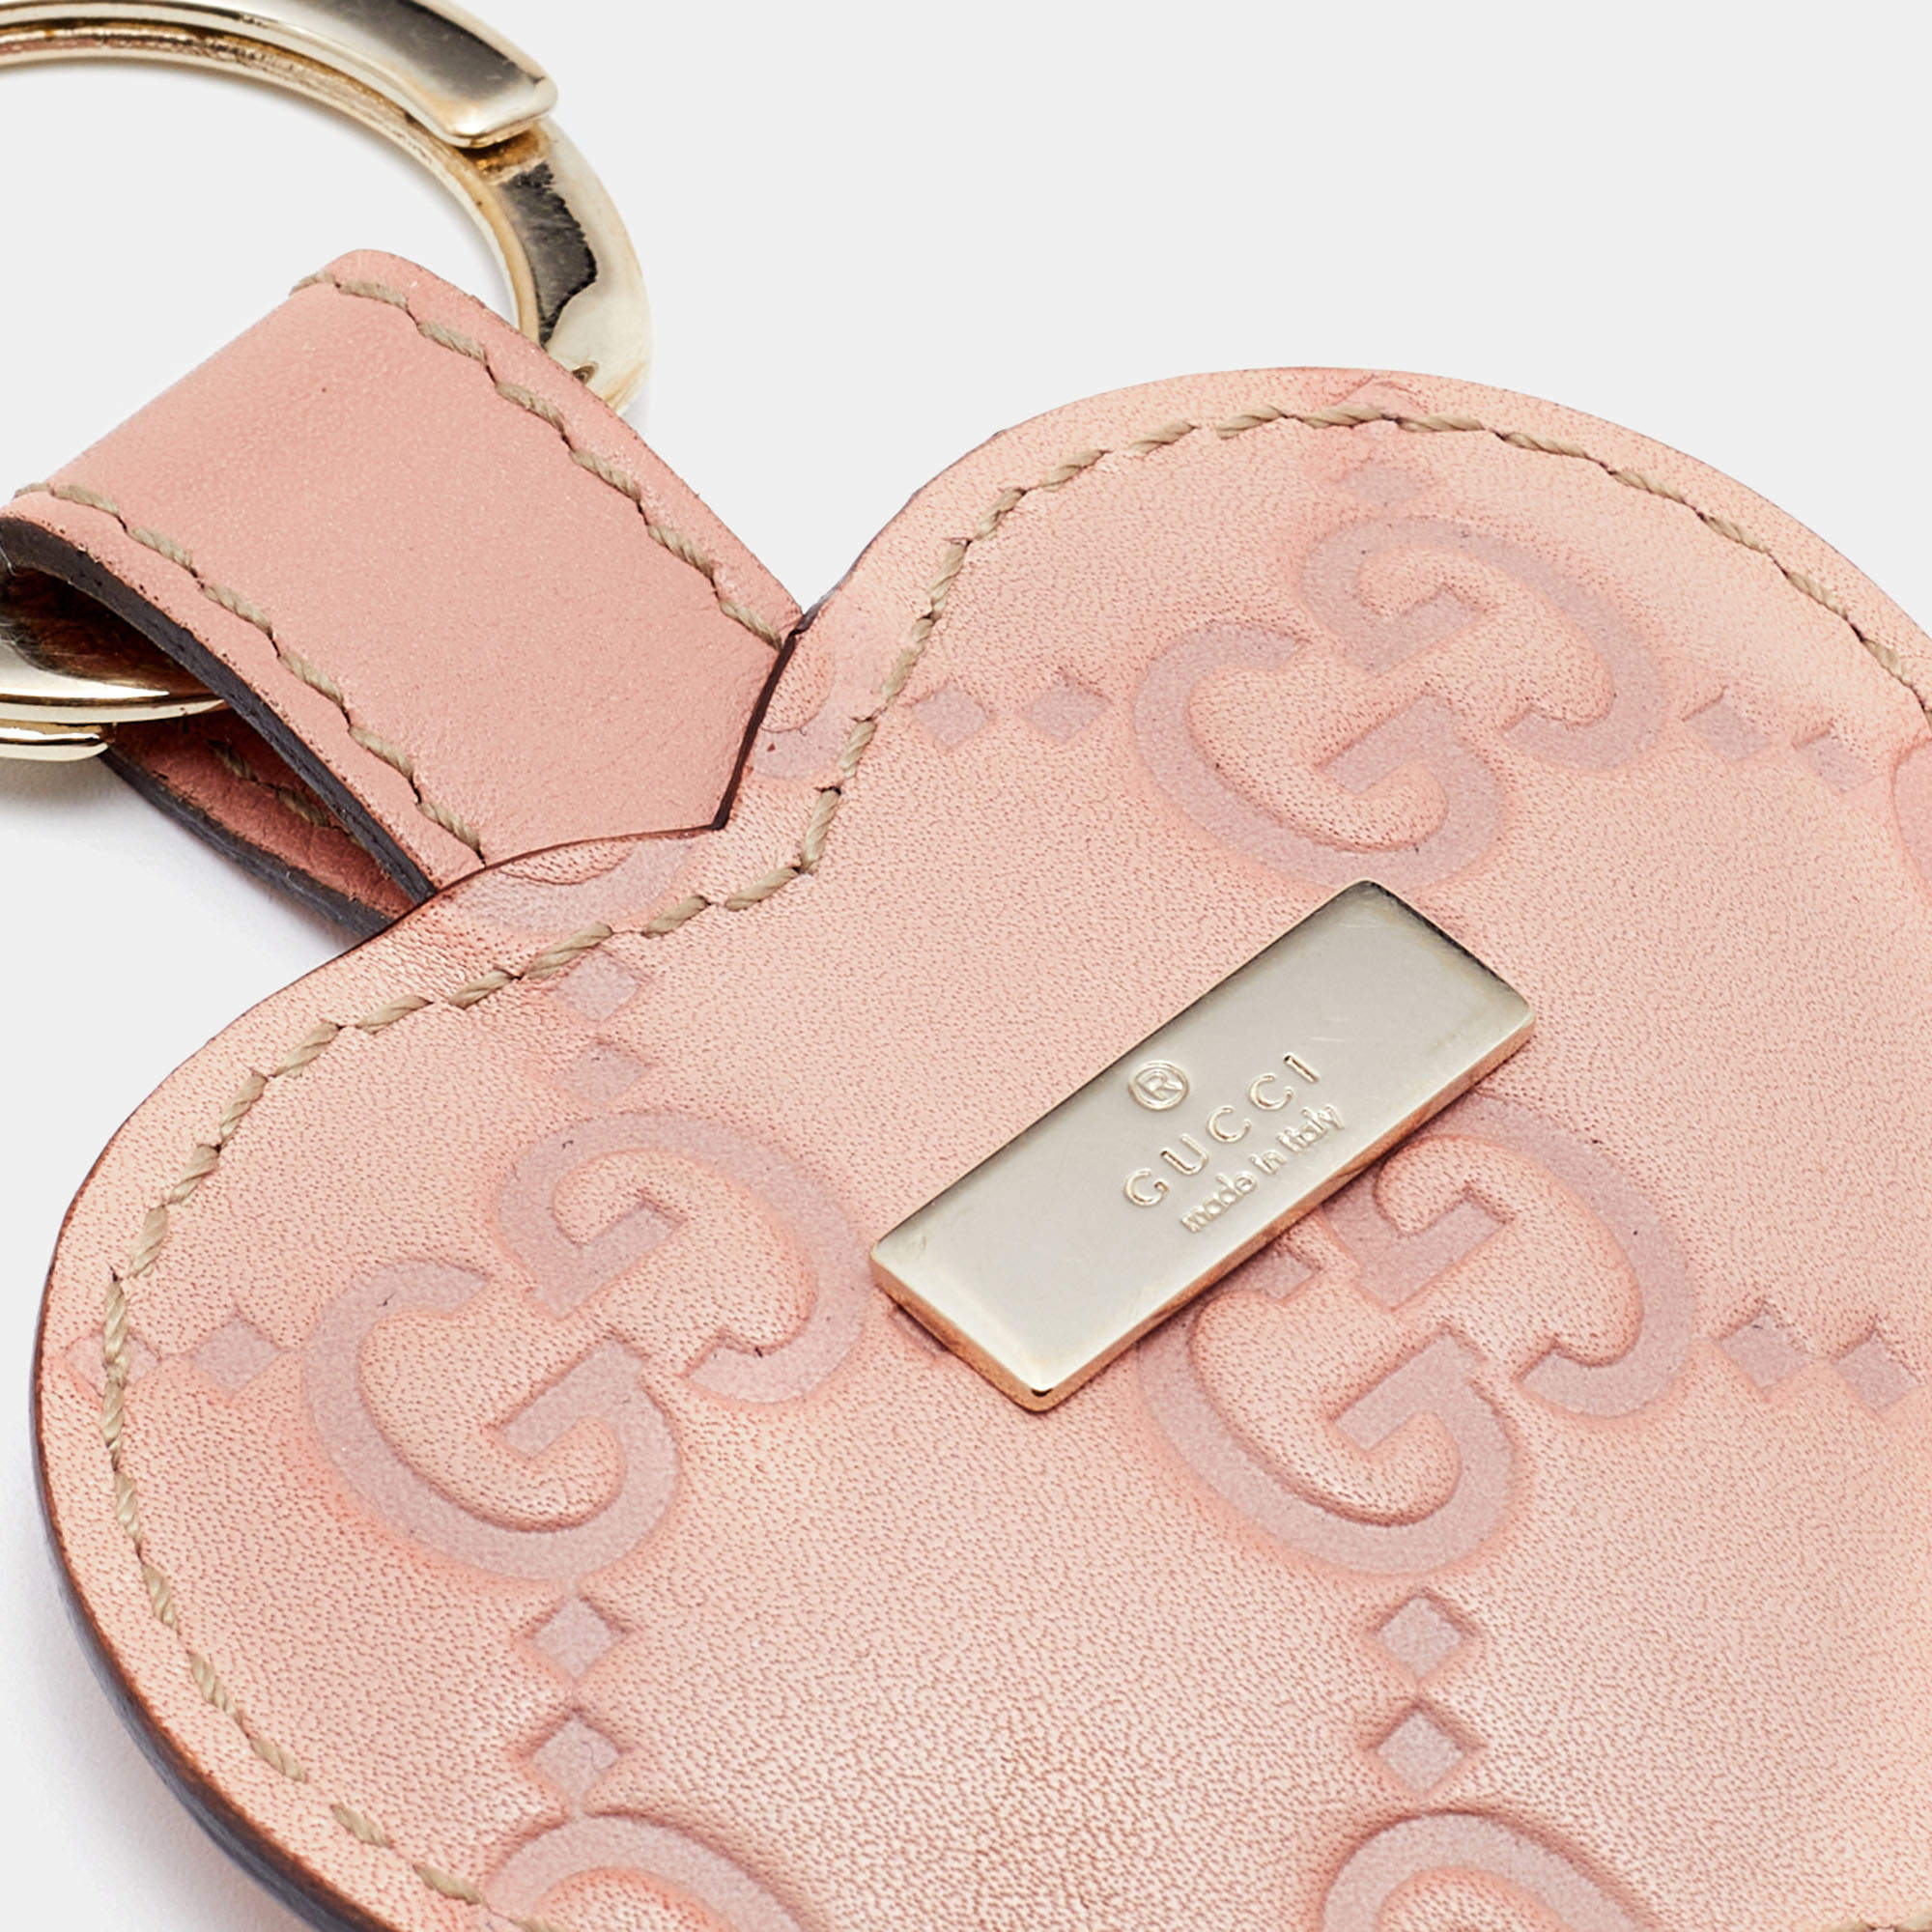 Heart Louis Vuitton And Gucci Keychain - HypedEffect